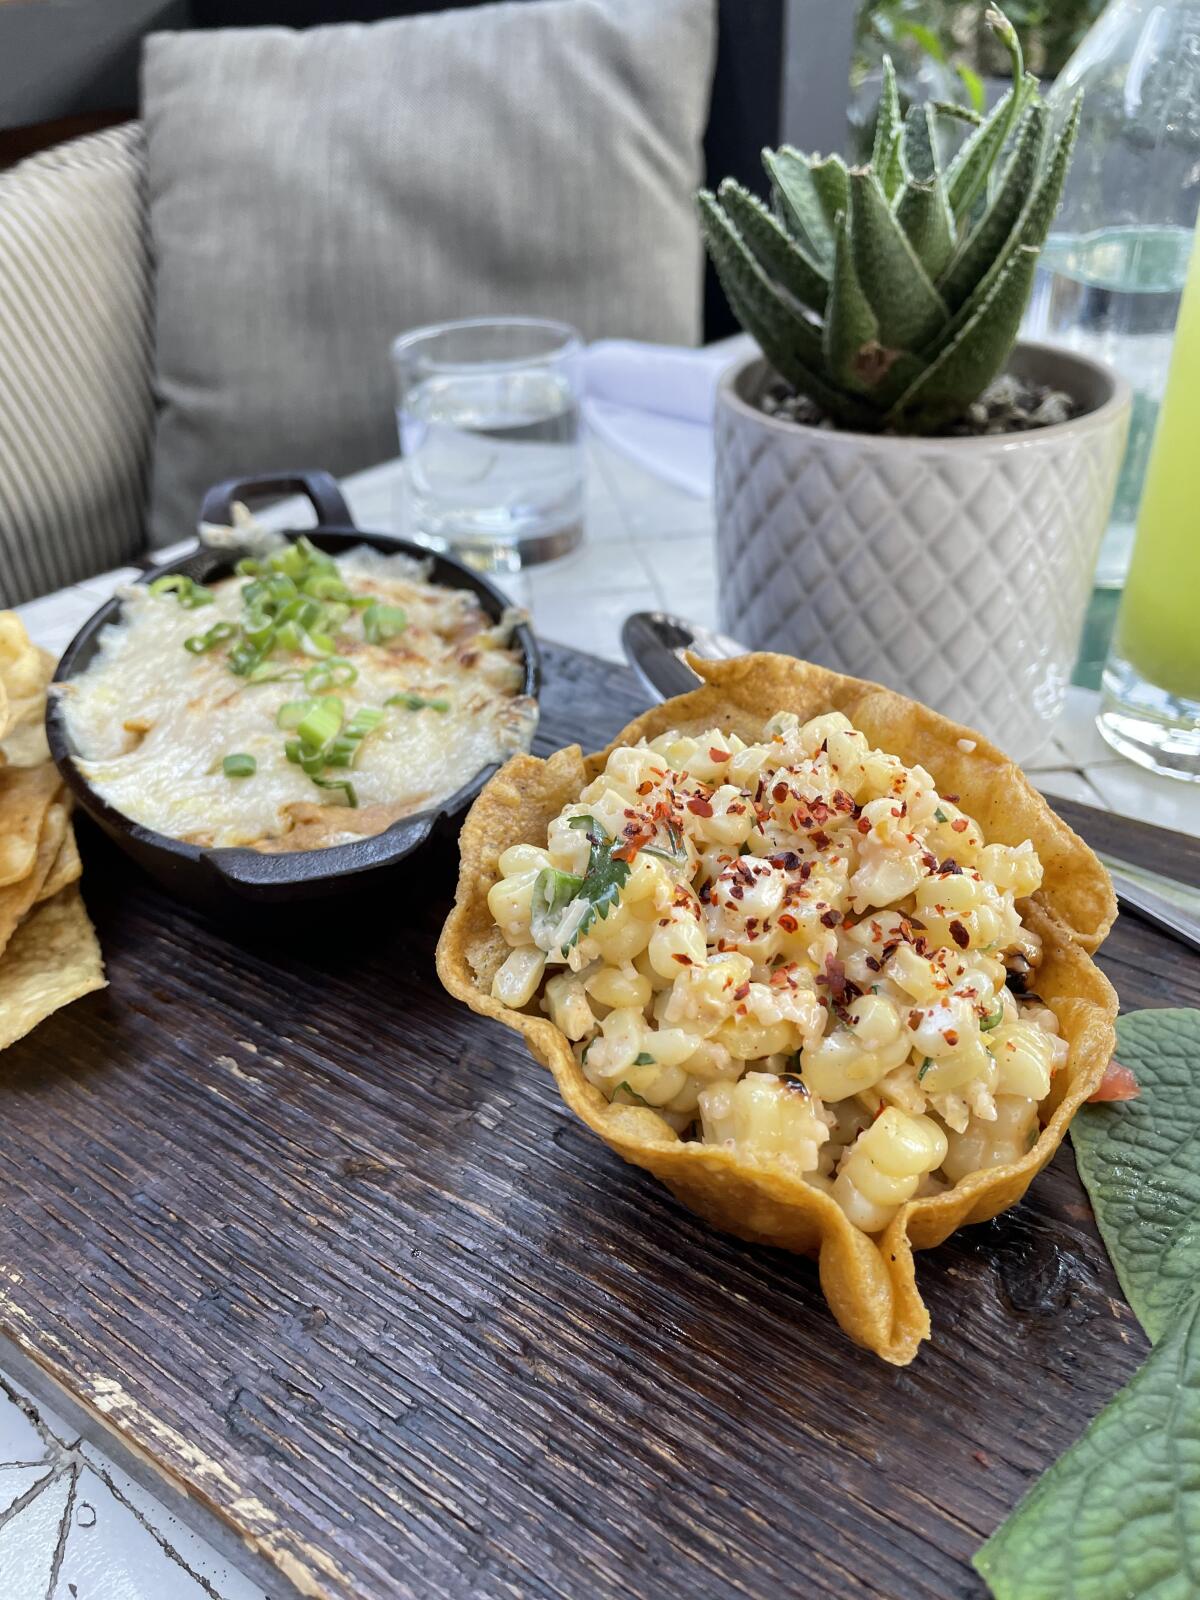 Queso fundido and grilled street corn, a pair of brunch offerings at Gracias Madre in Newport Beach.